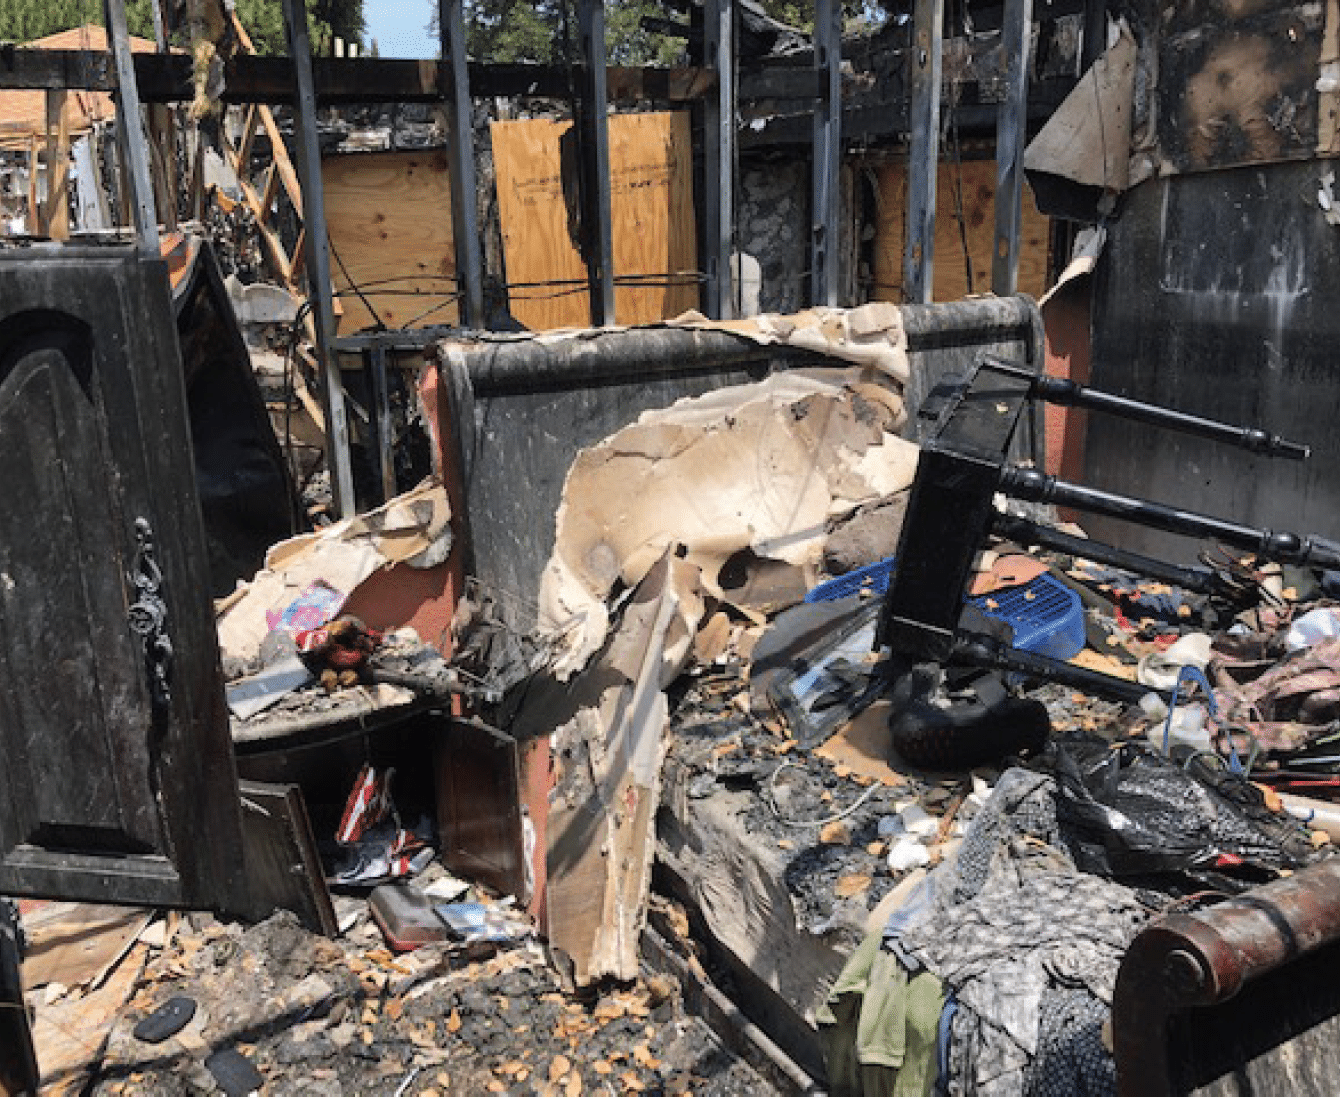 The Bedroom Of The Home That Burned